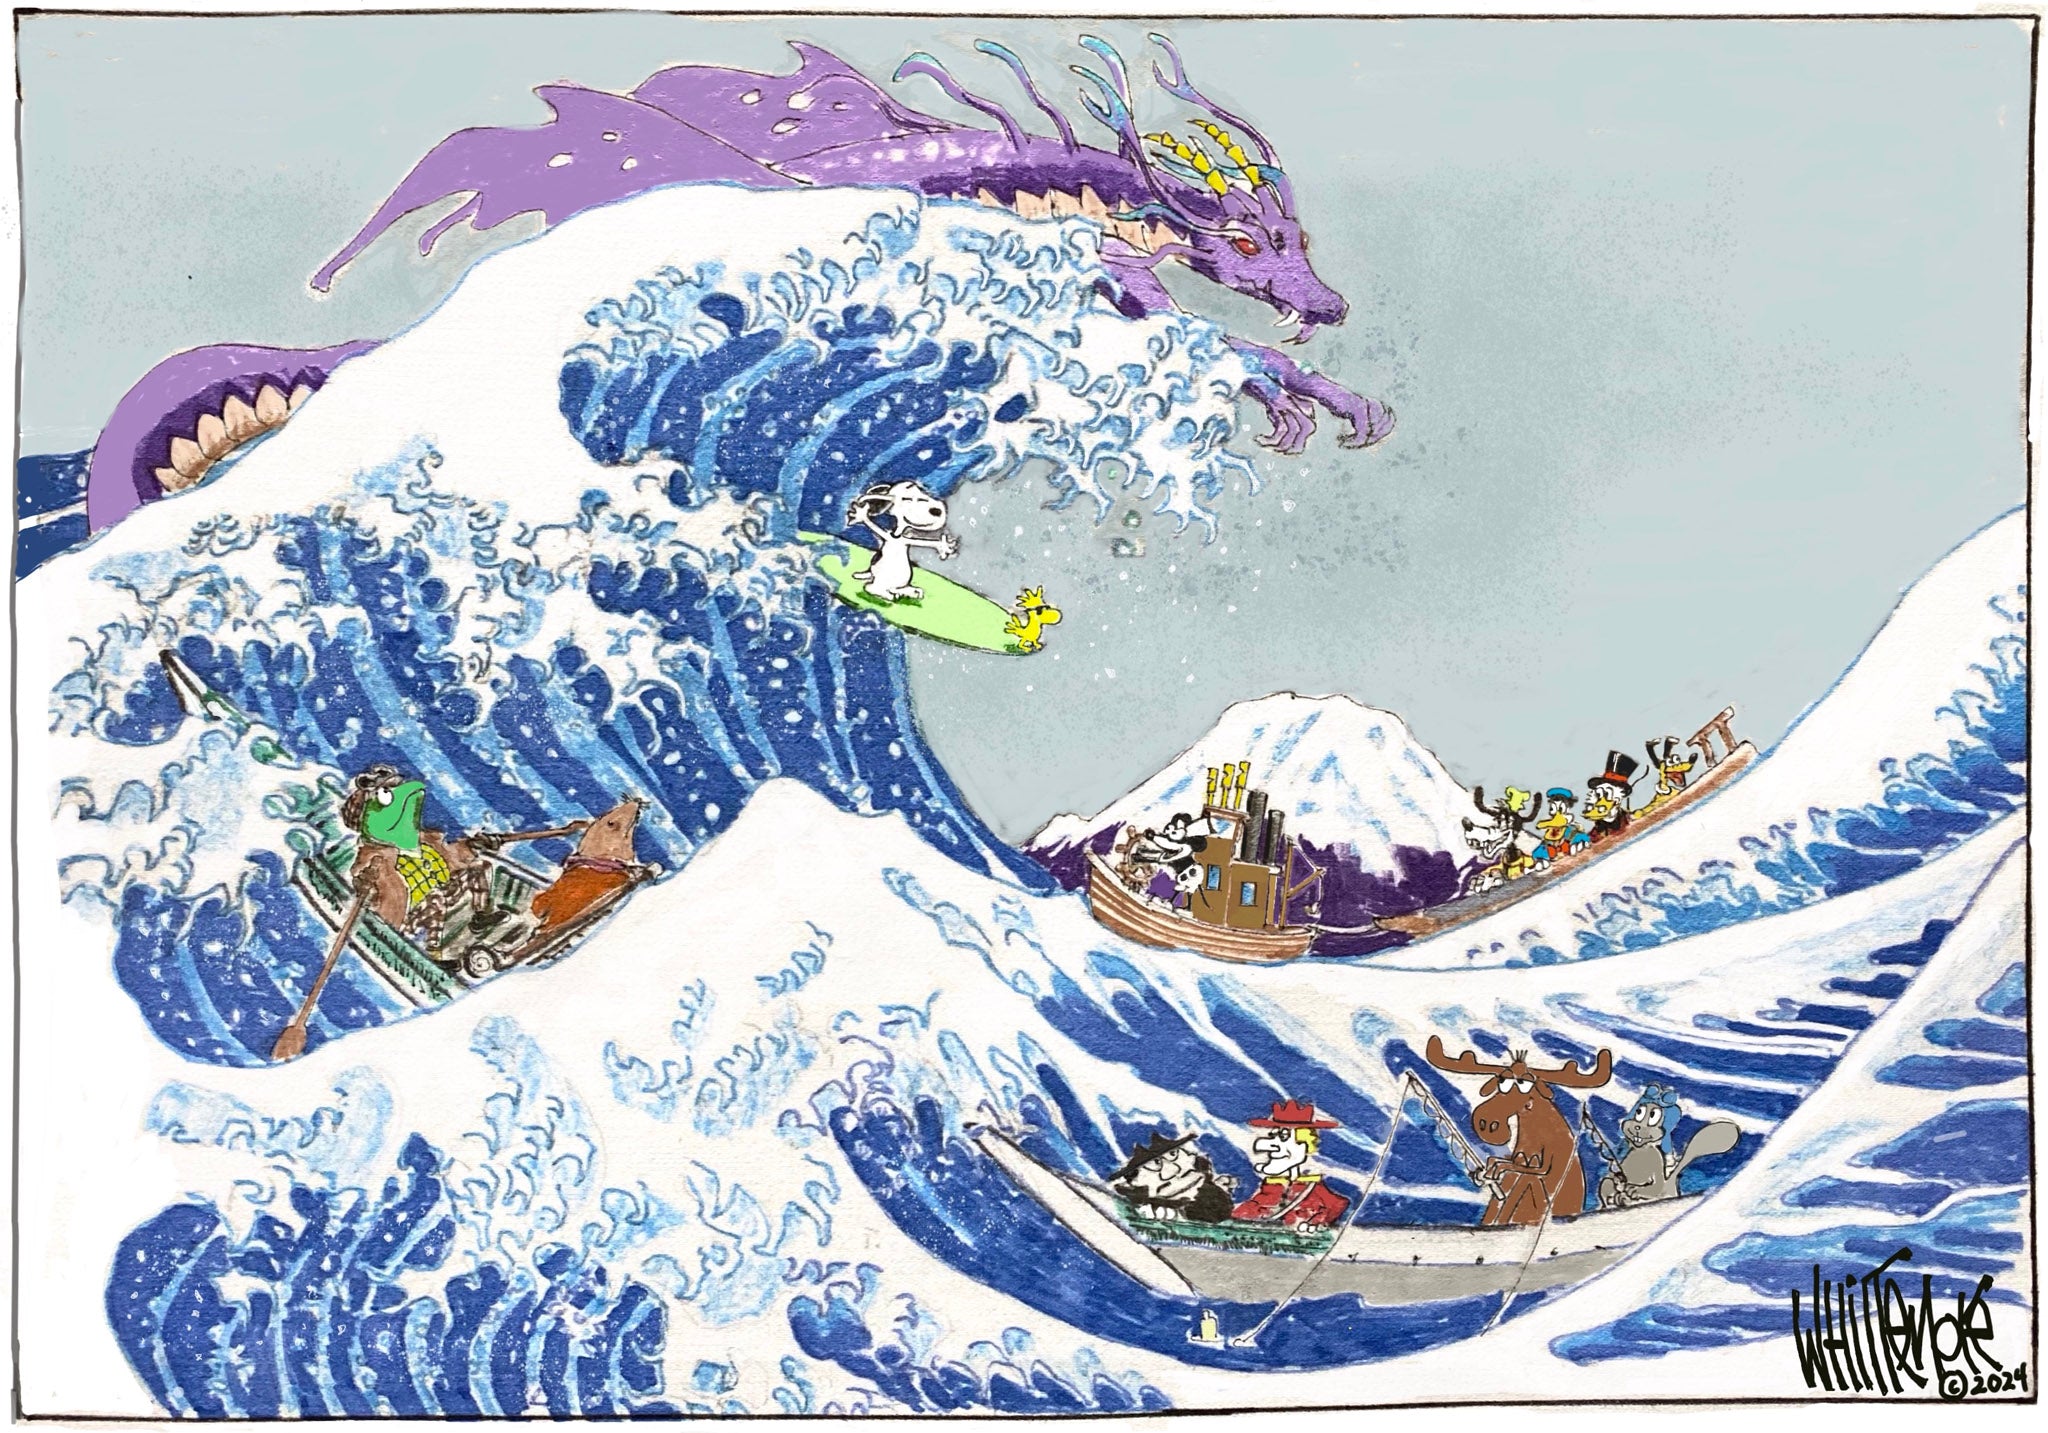 Cartoon by Thomas Whittemore, inspired by Hokusai’s Great Wave